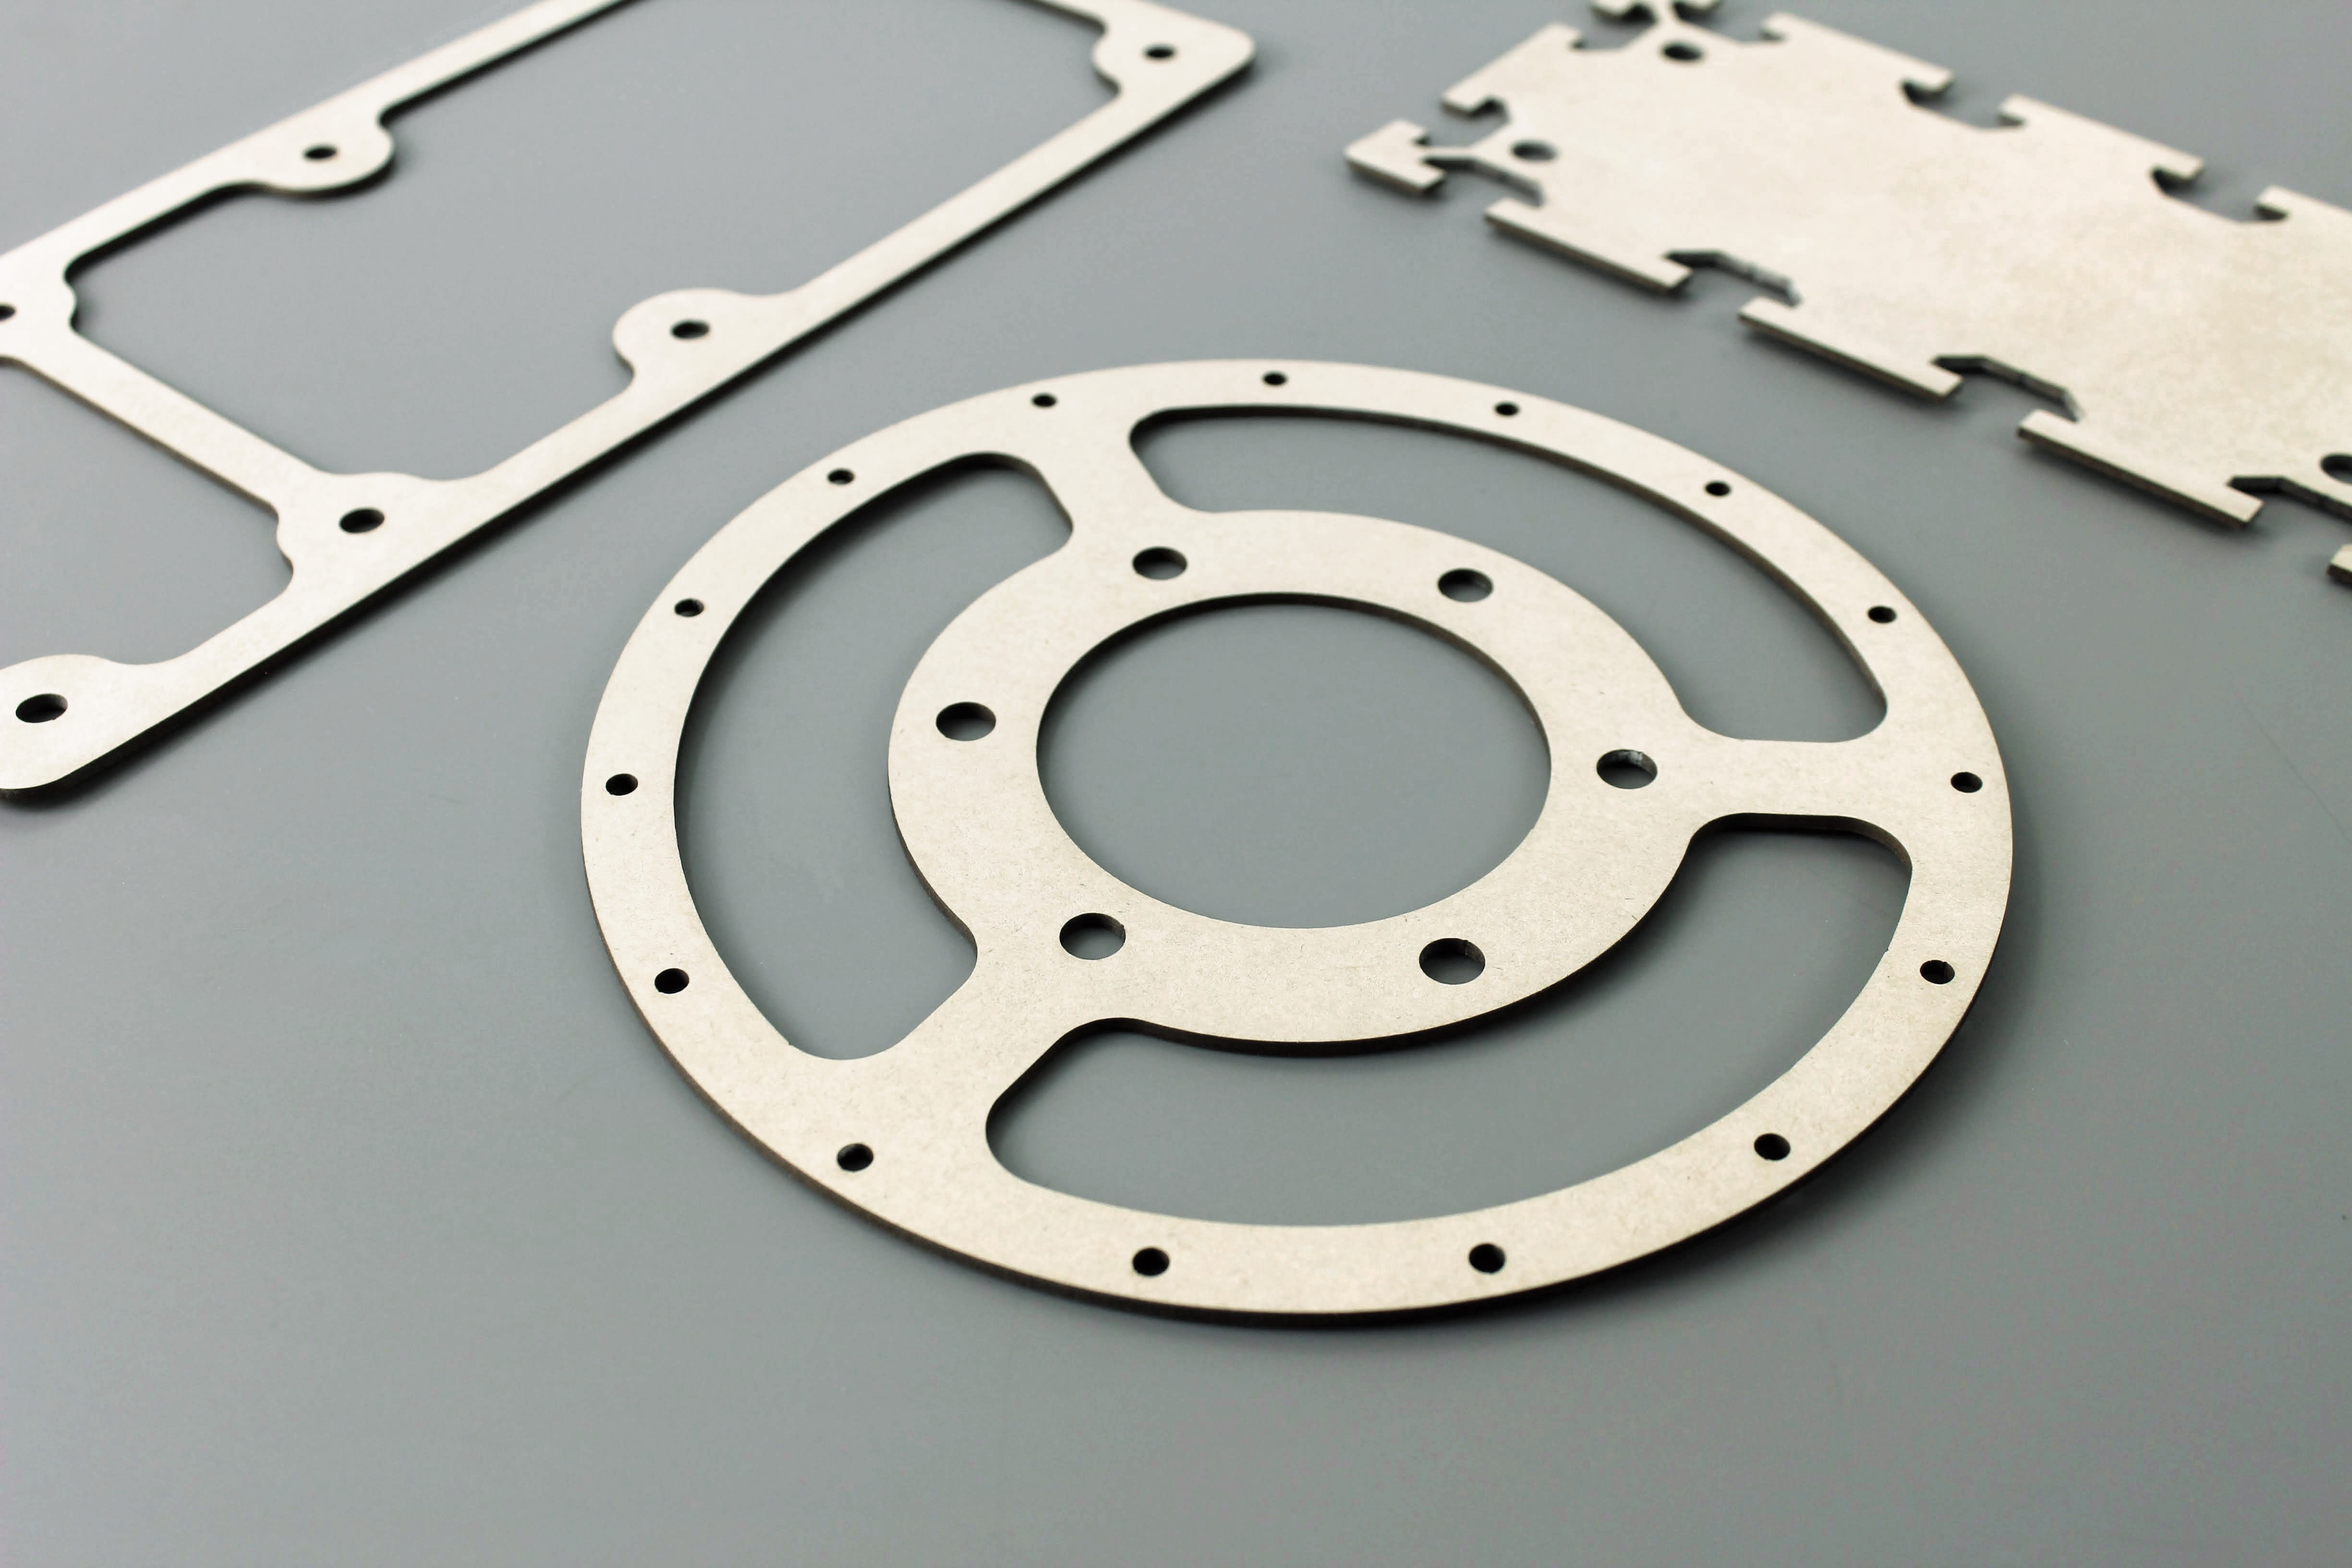 Various gaskets with complex shapes, laser cut from gasket paper